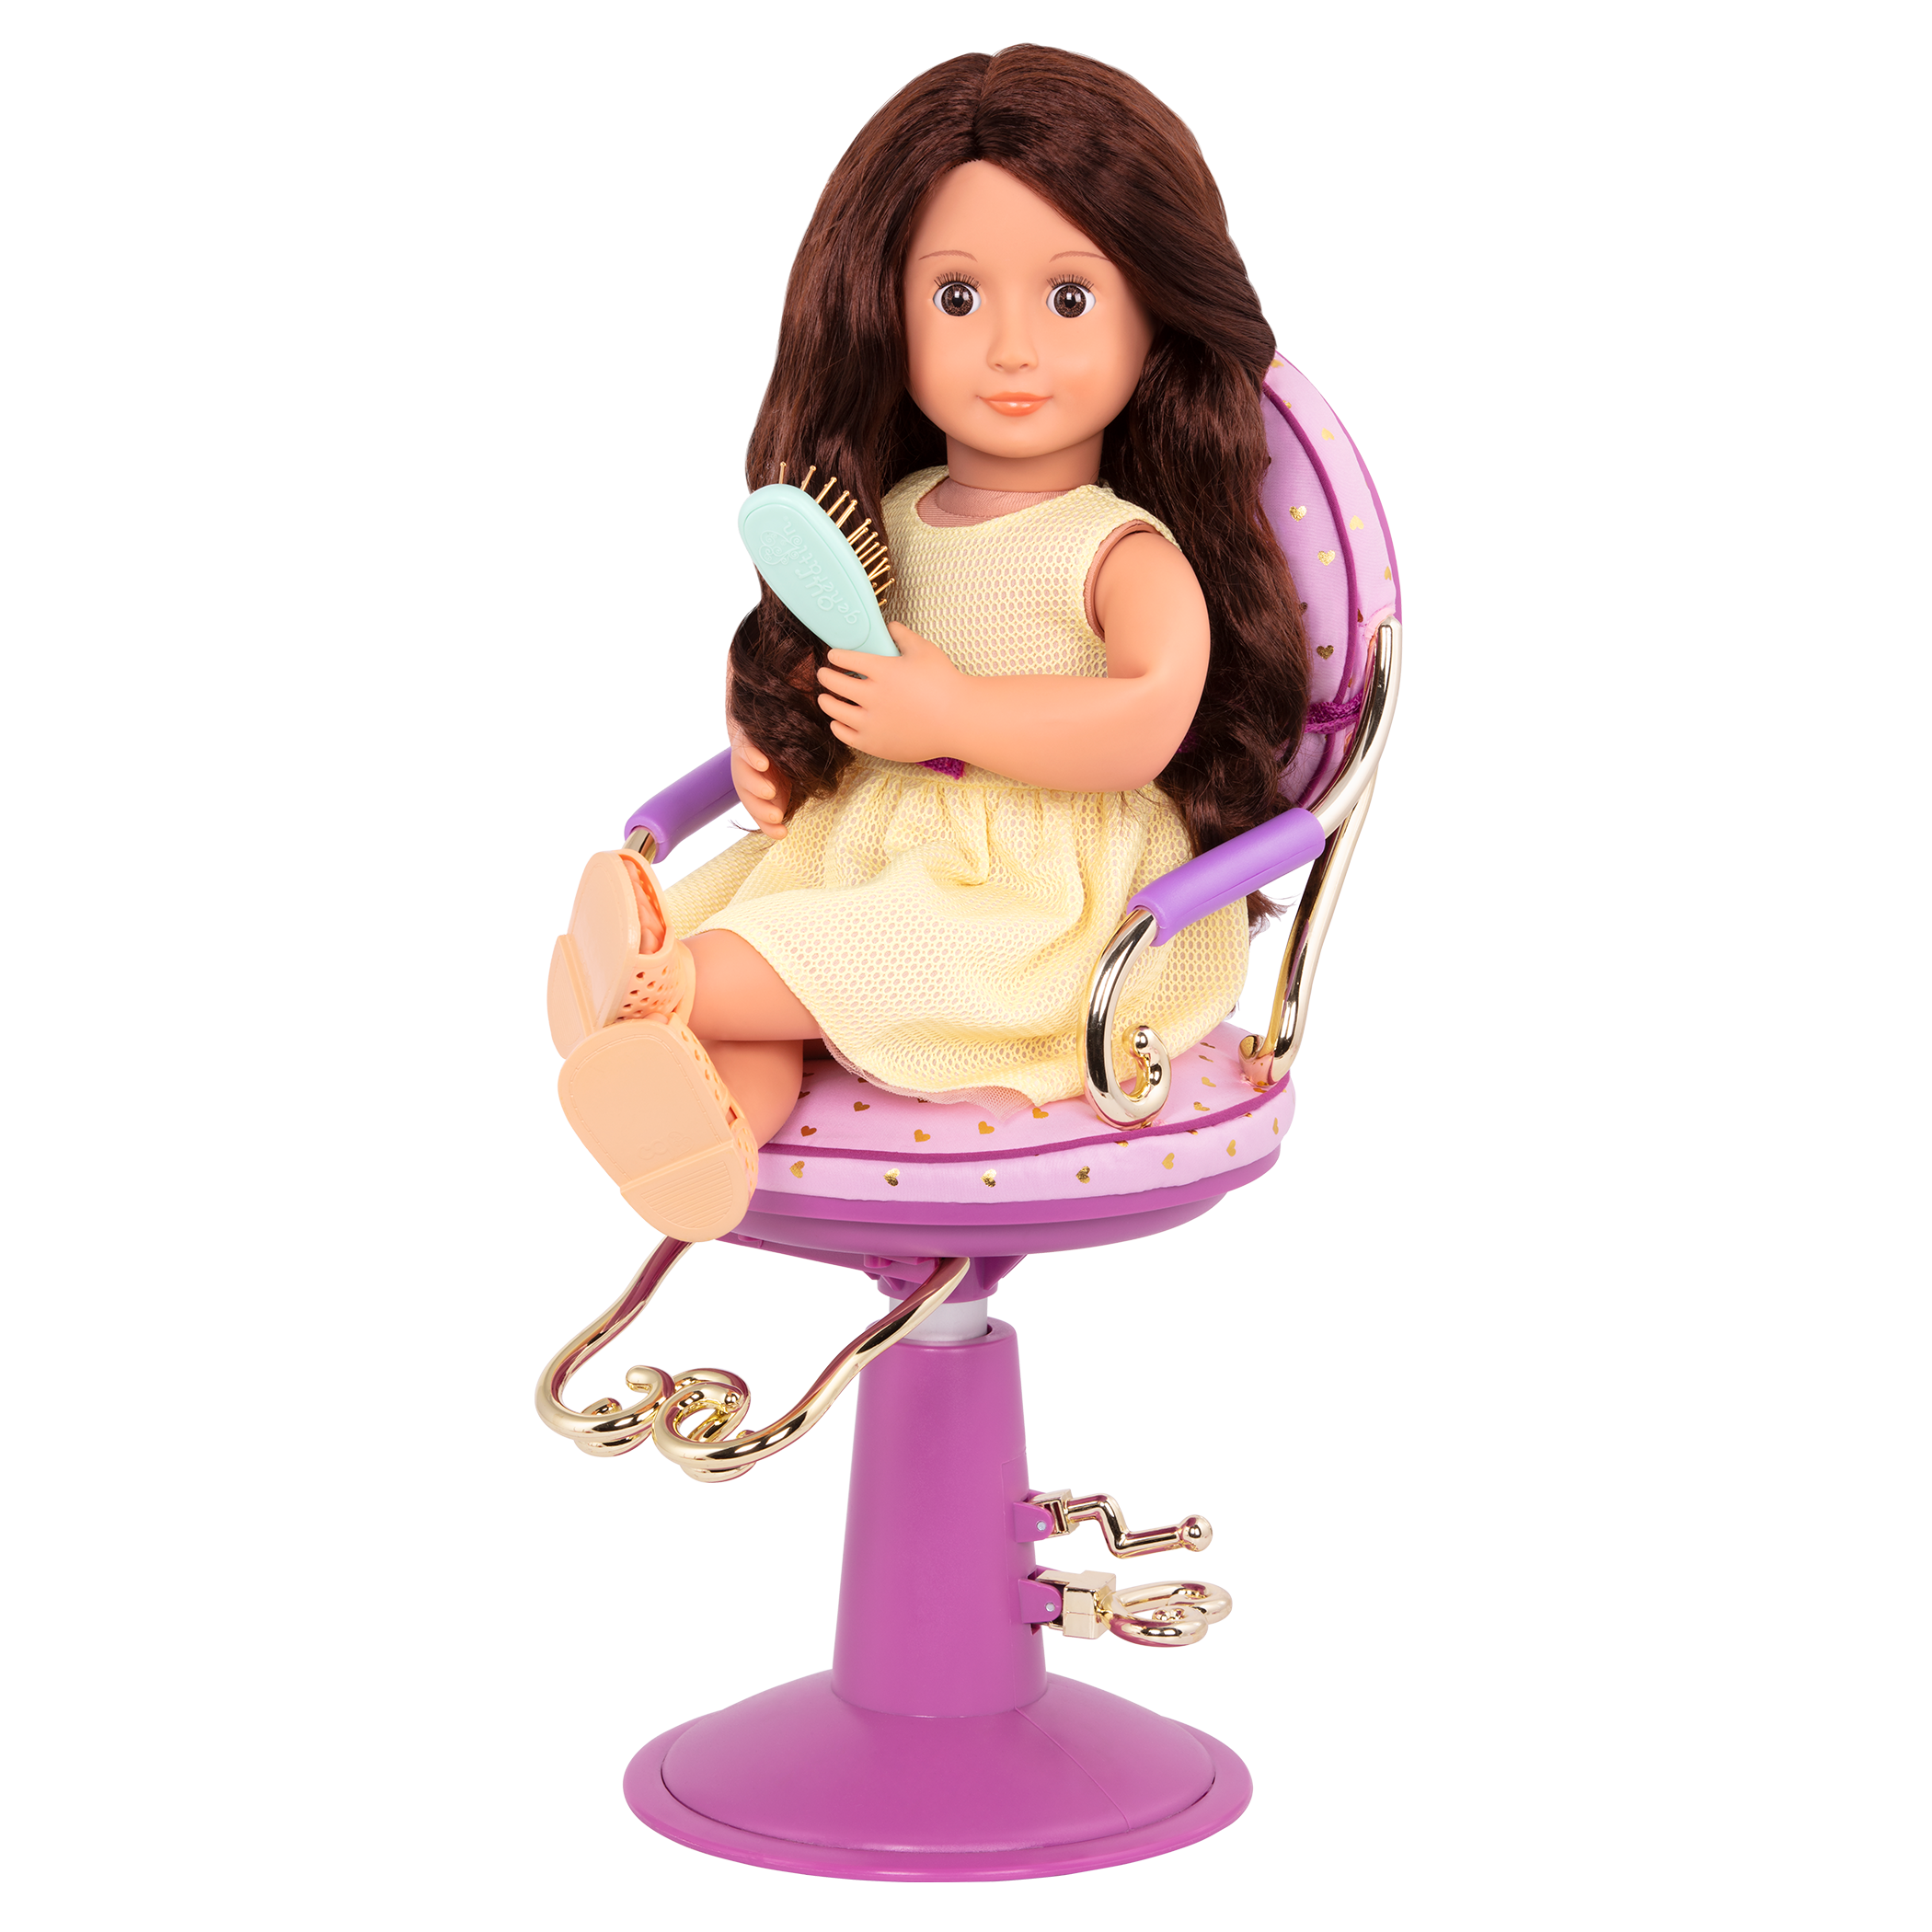 Gold and purple salon chair playset